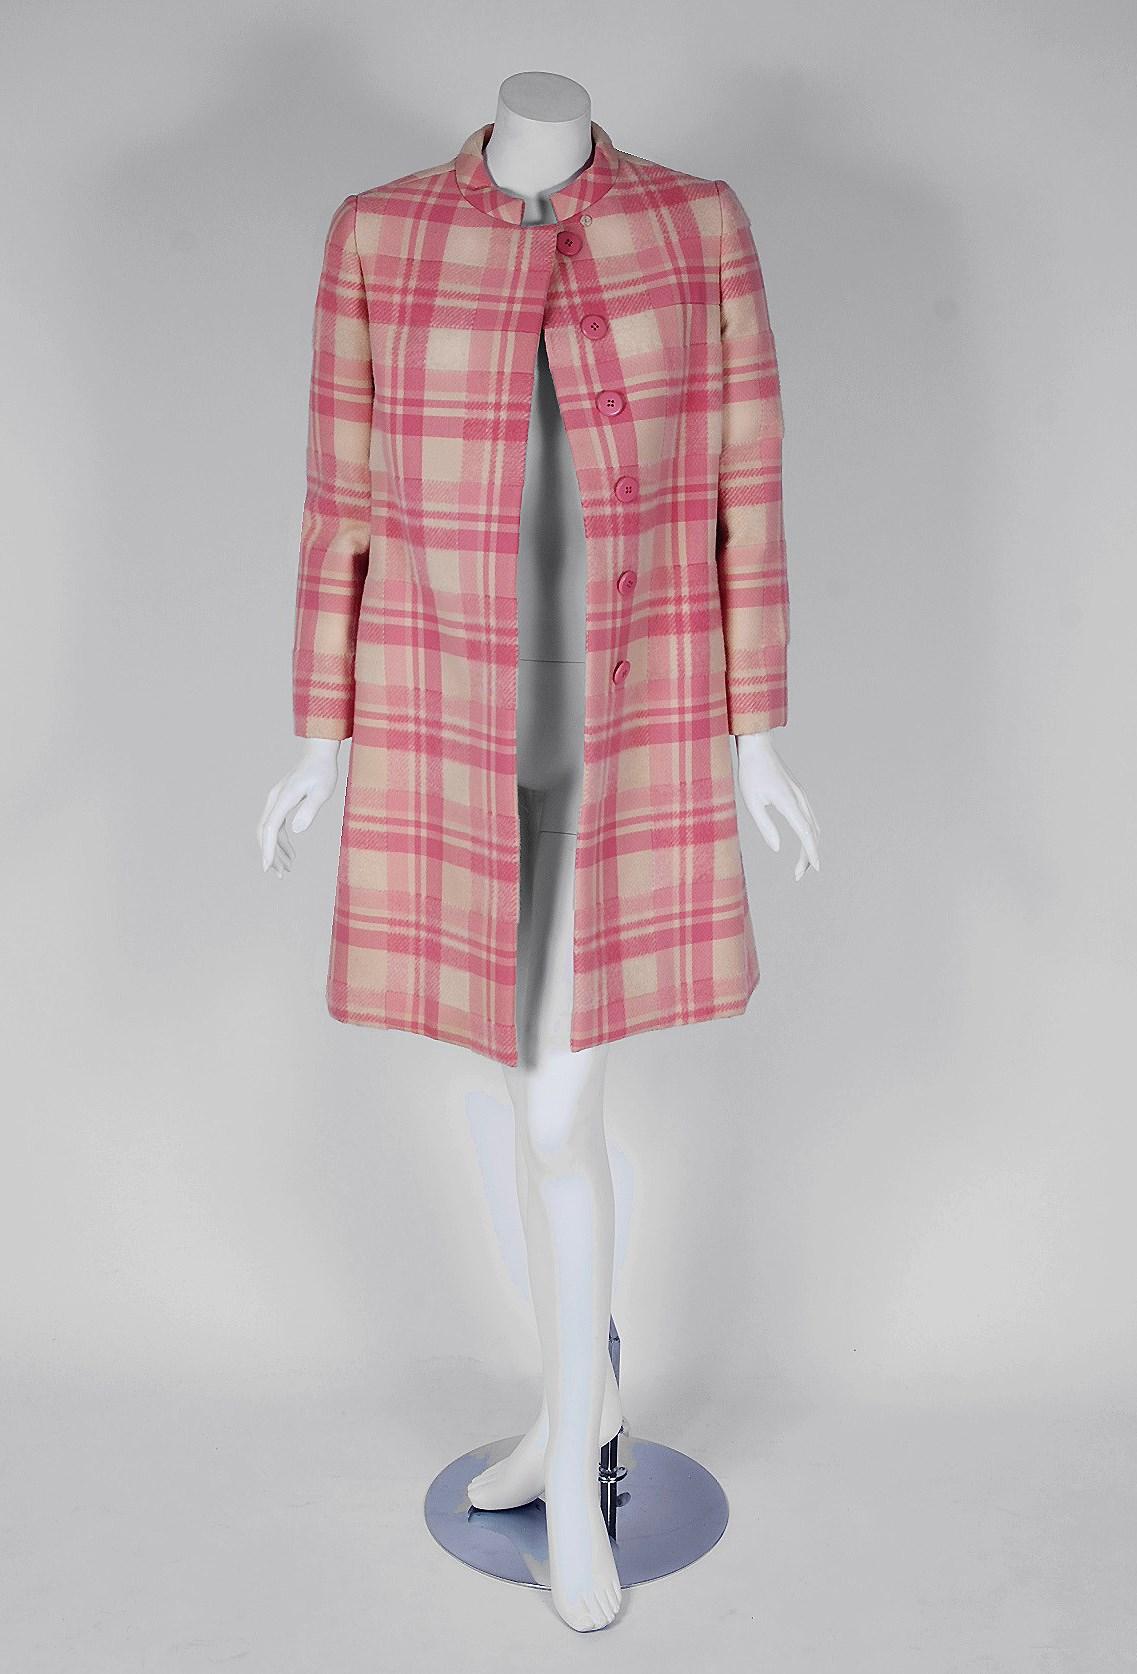 Beauriful George Halley Couture pink plaid winter coat dating back to his 1966 collection. Halley started this career at the early age of eighteen by working with the famous designer Charles James who said he was a 